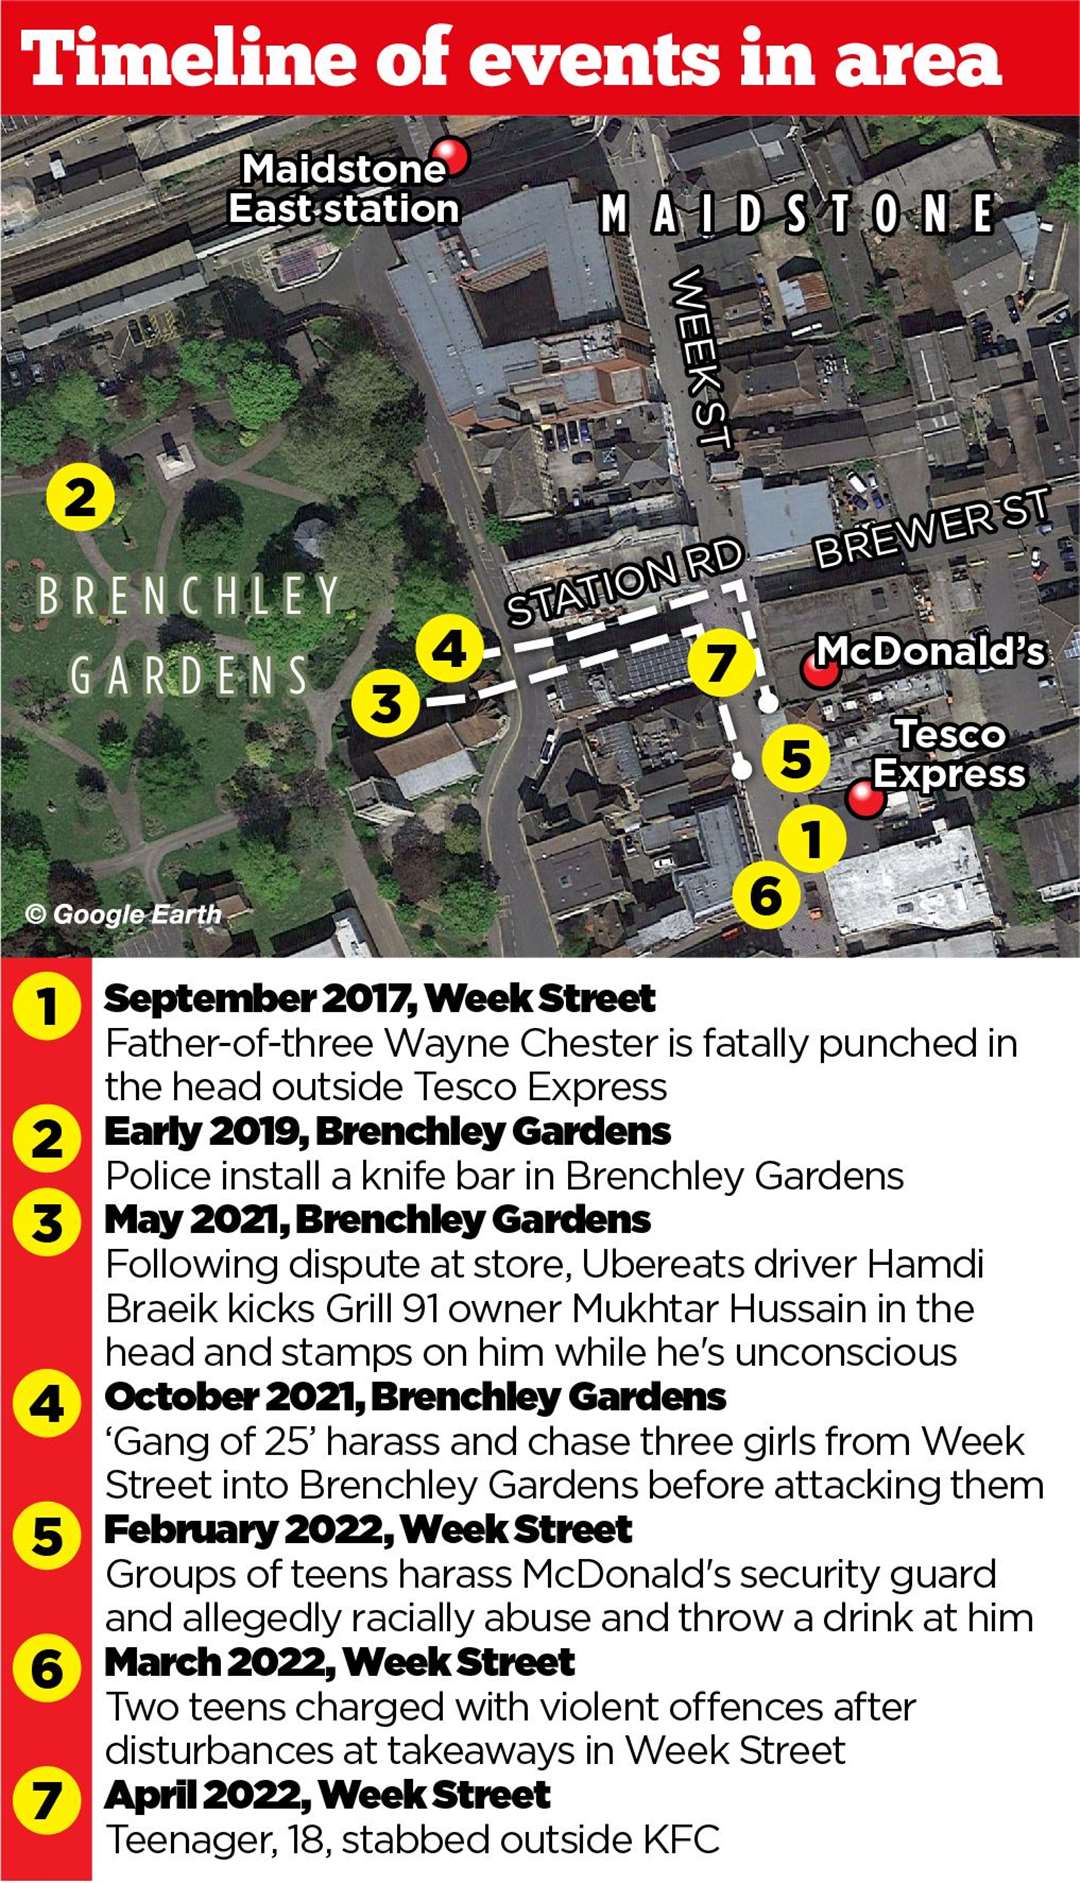 Serious incidents near Week Street, Maidstone, and Brenchley Gardens over the past five years